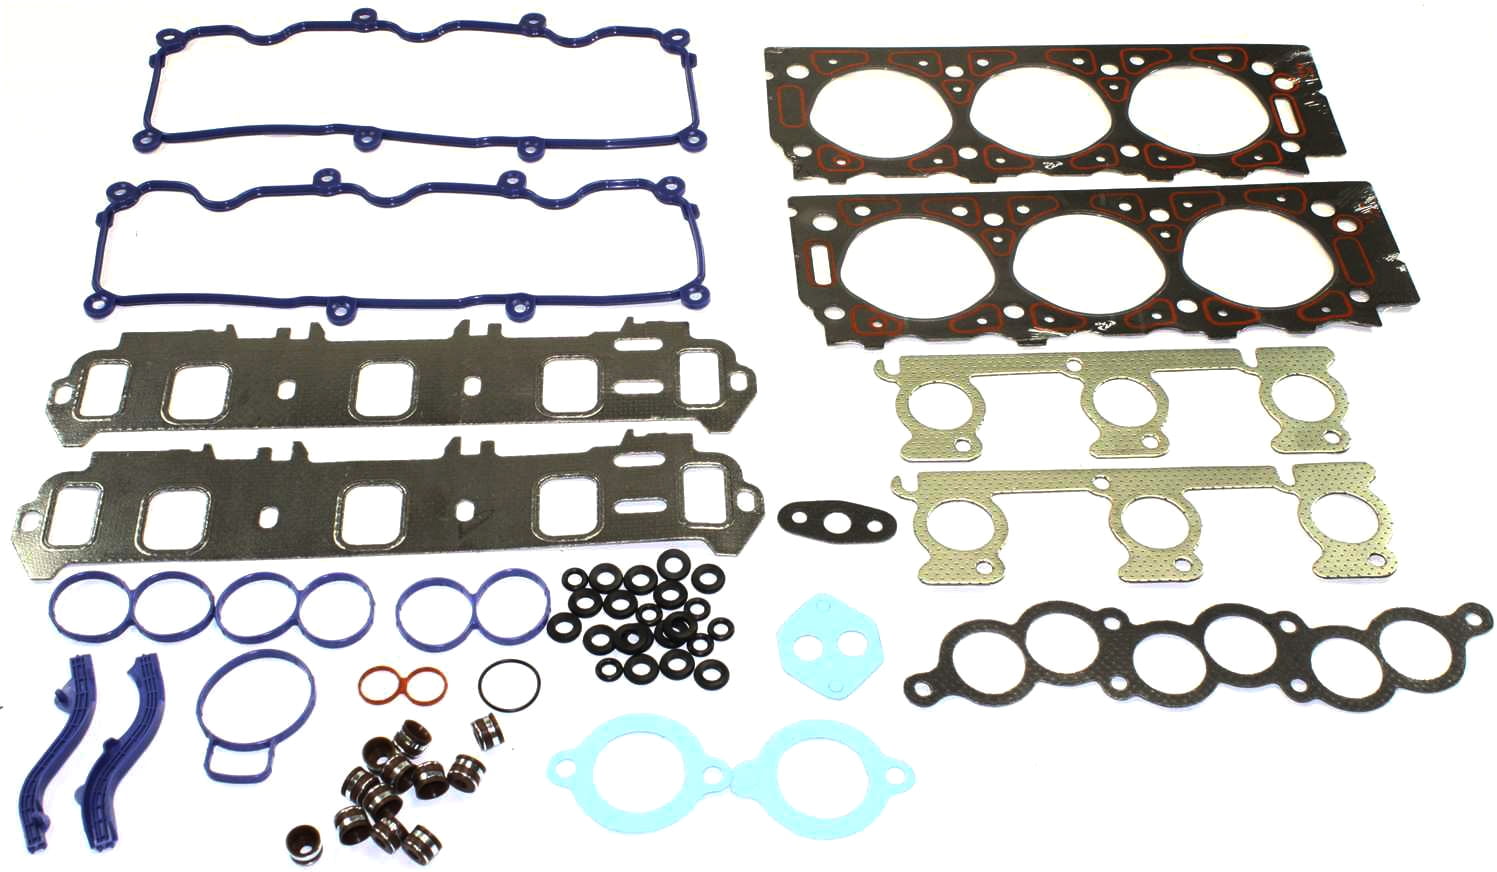 Head Gasket Set Compatible with 1991-2001 Ford Ranger 1994-2001 Mazda B3000  6Cyl 3.0L